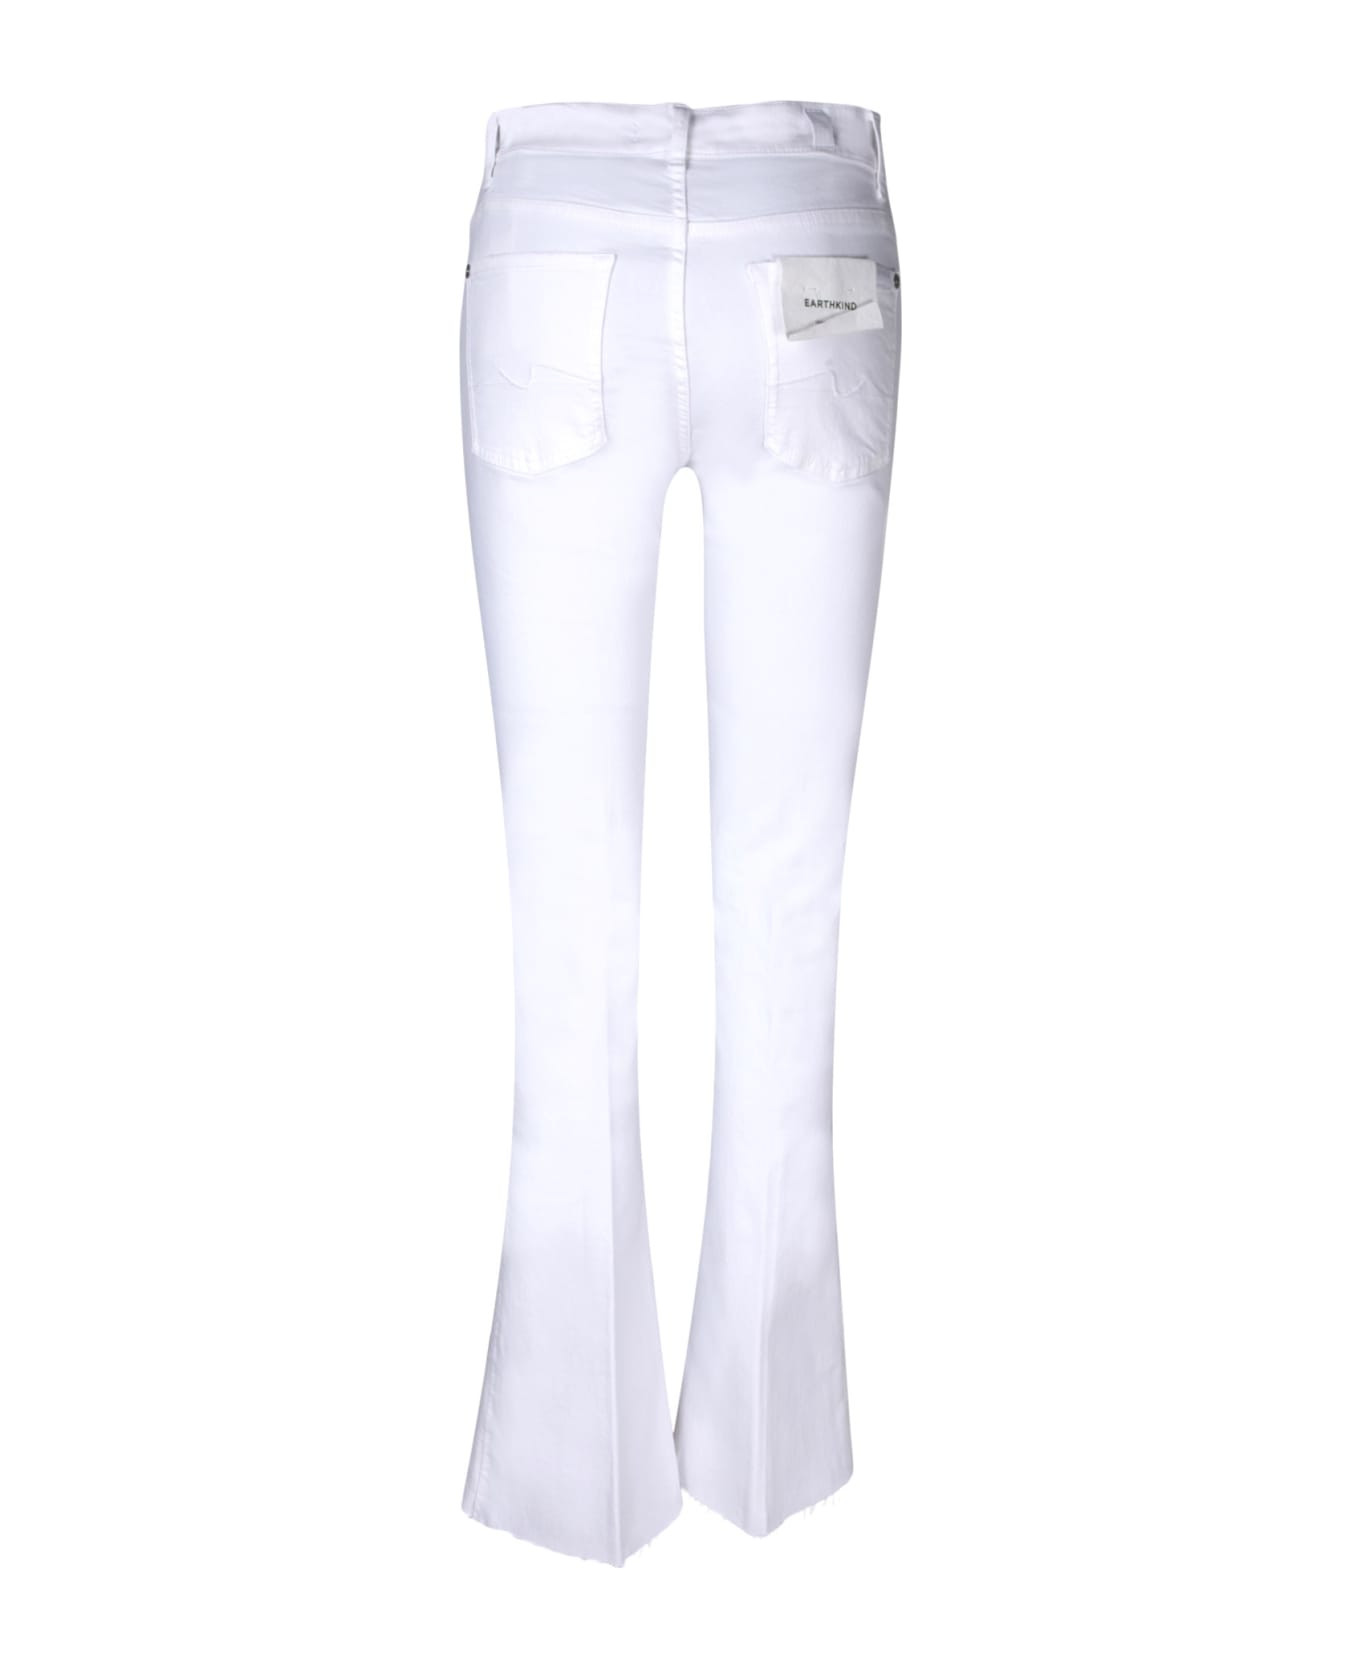 7 For All Mankind Bootcut White Jeans - White デニム